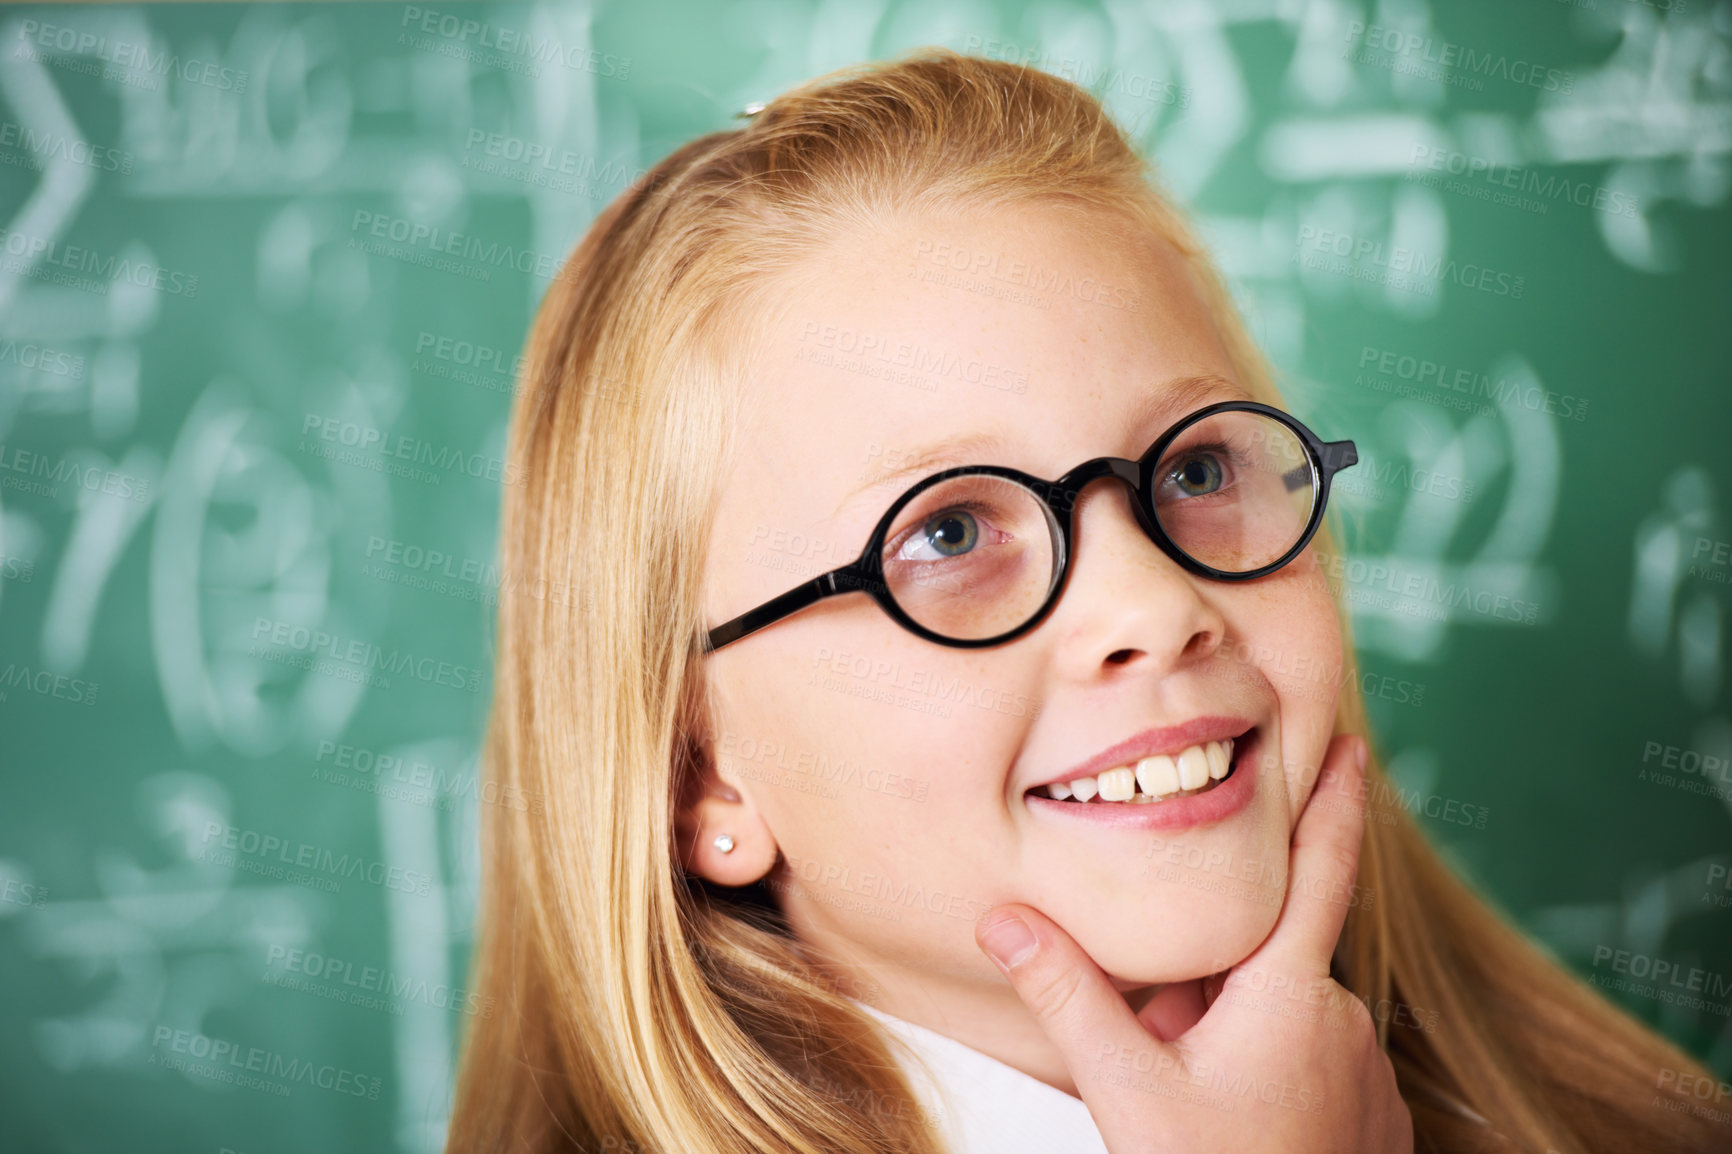 Buy stock photo Thinking, idea and child student with glasses by board for planning, decision or brainstorming in classroom. Education, learning and girl kid with choice, vision or solution face expression in school